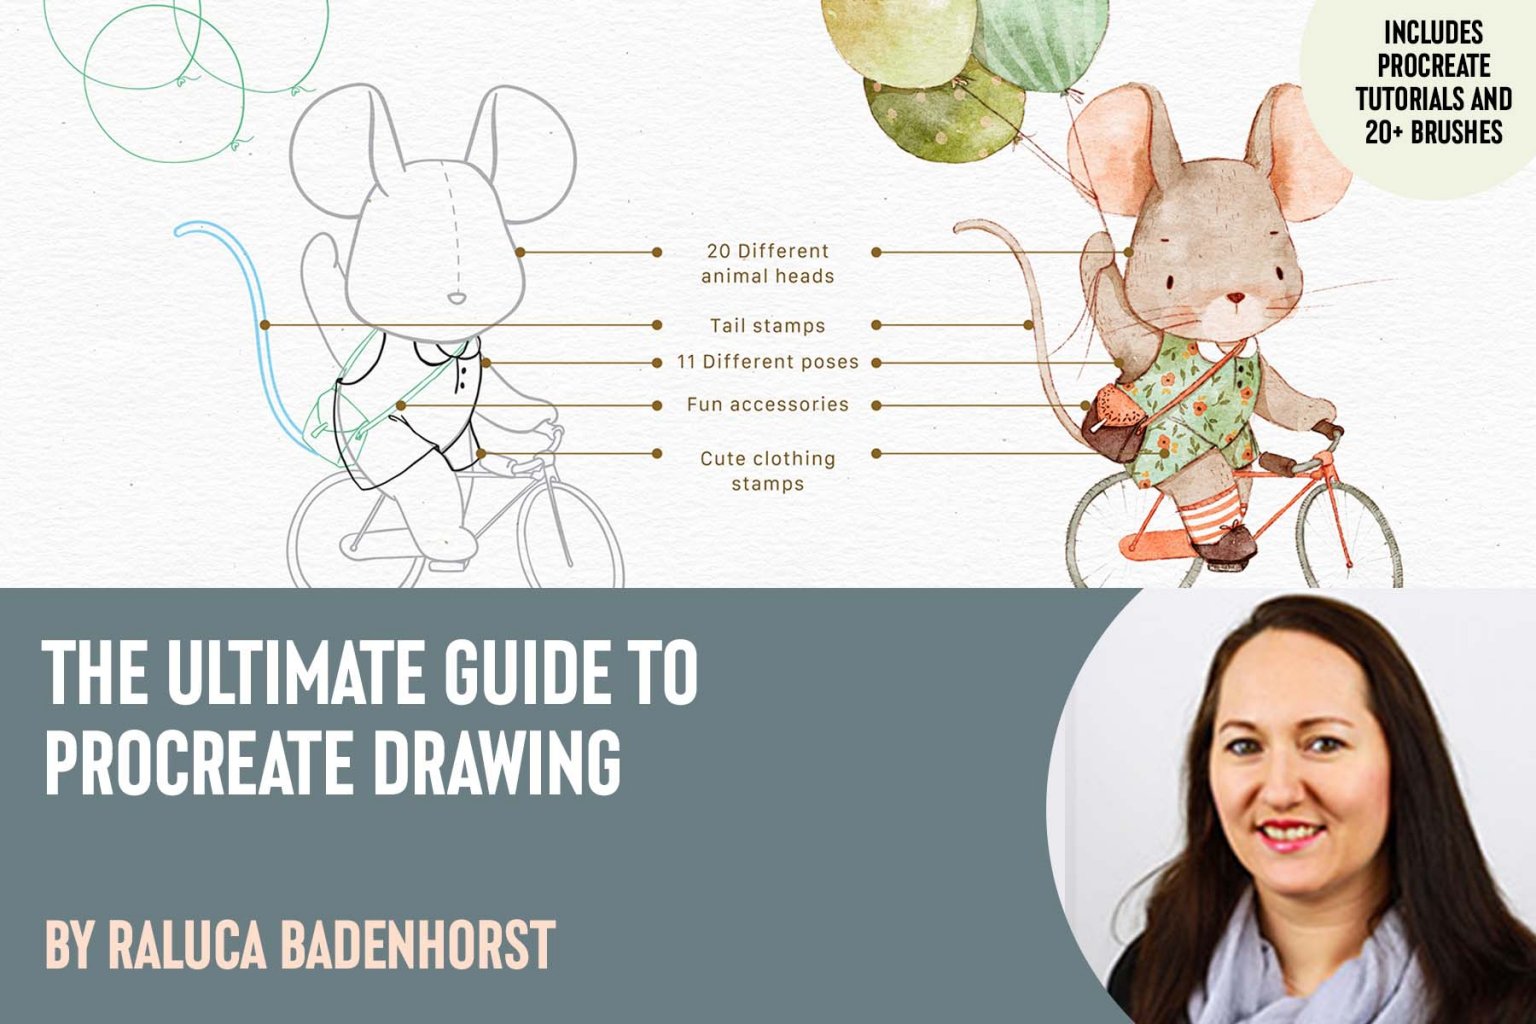 The Ultimate Guide to Procreate Drawing